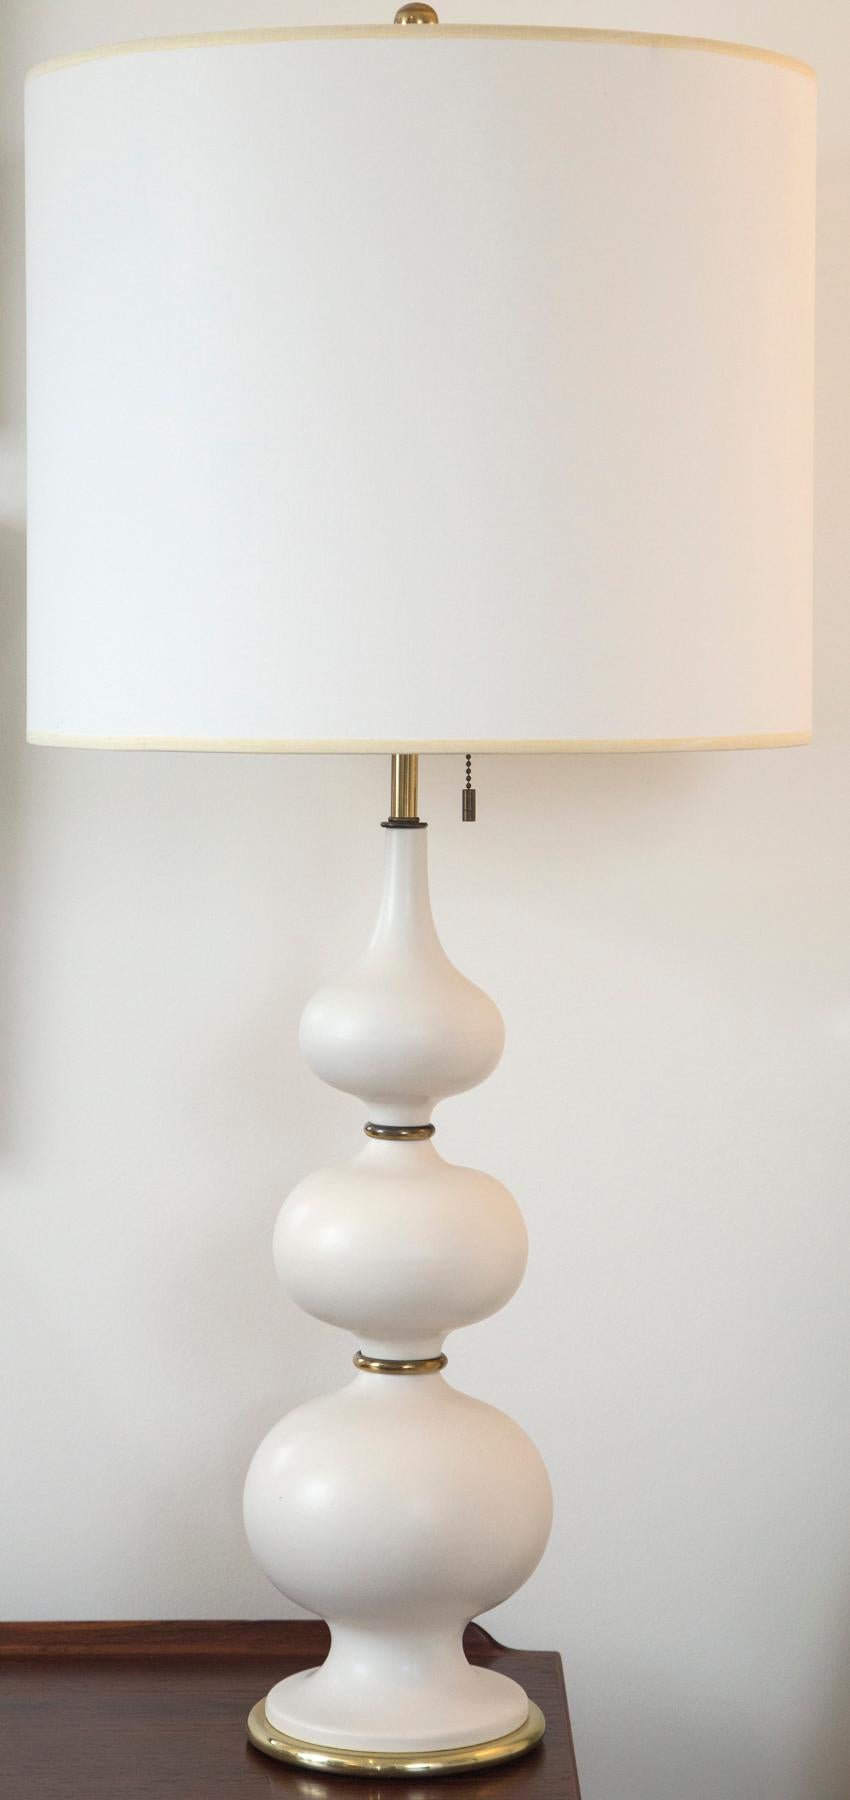 Pair of tall cream lamps by Gerald Thurston.
Measures: full lamp: 38